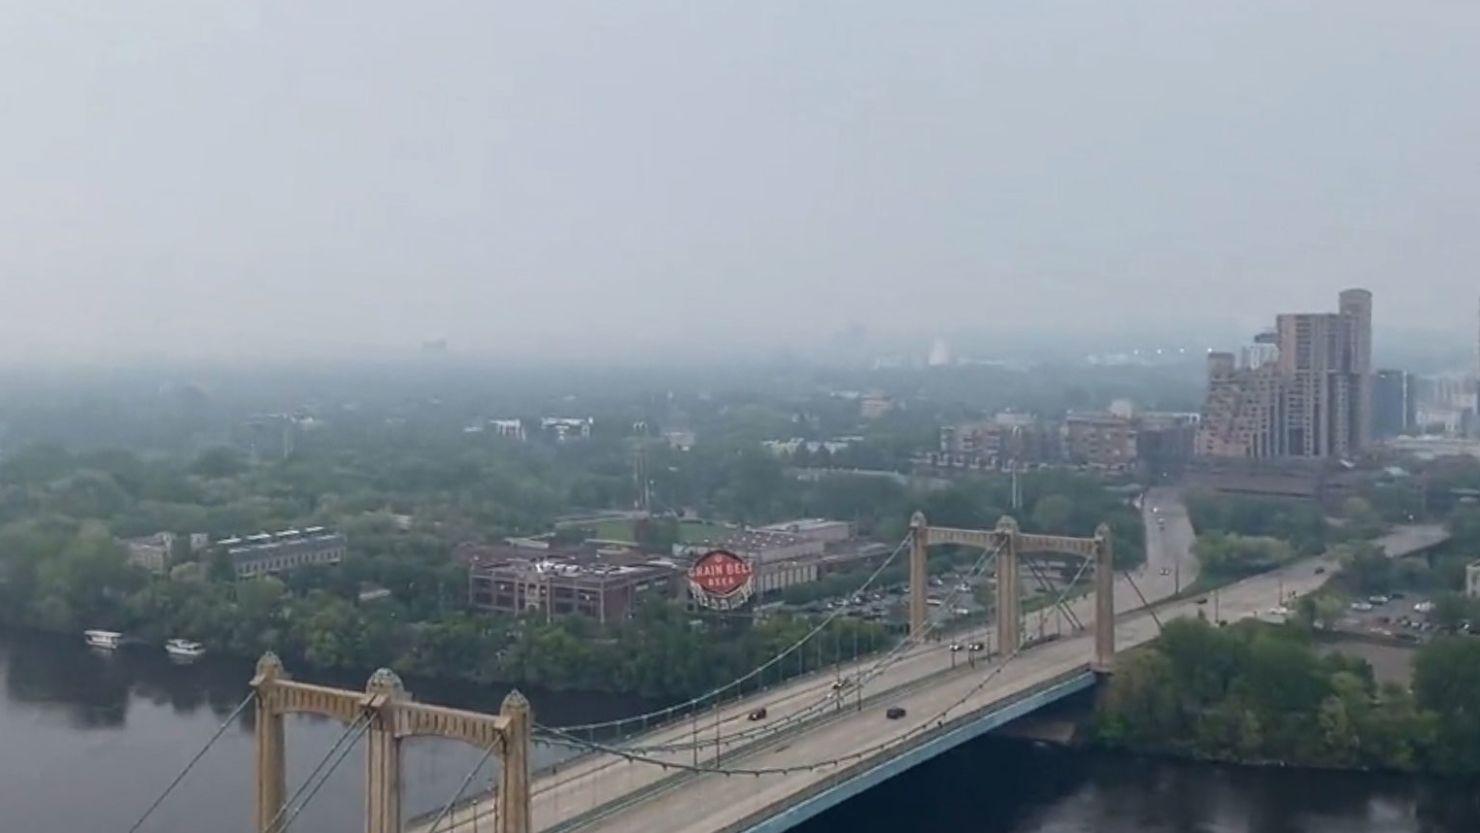 Smoke from wildfires in Canada hangs over Minneapolis on Thursday, May 18.